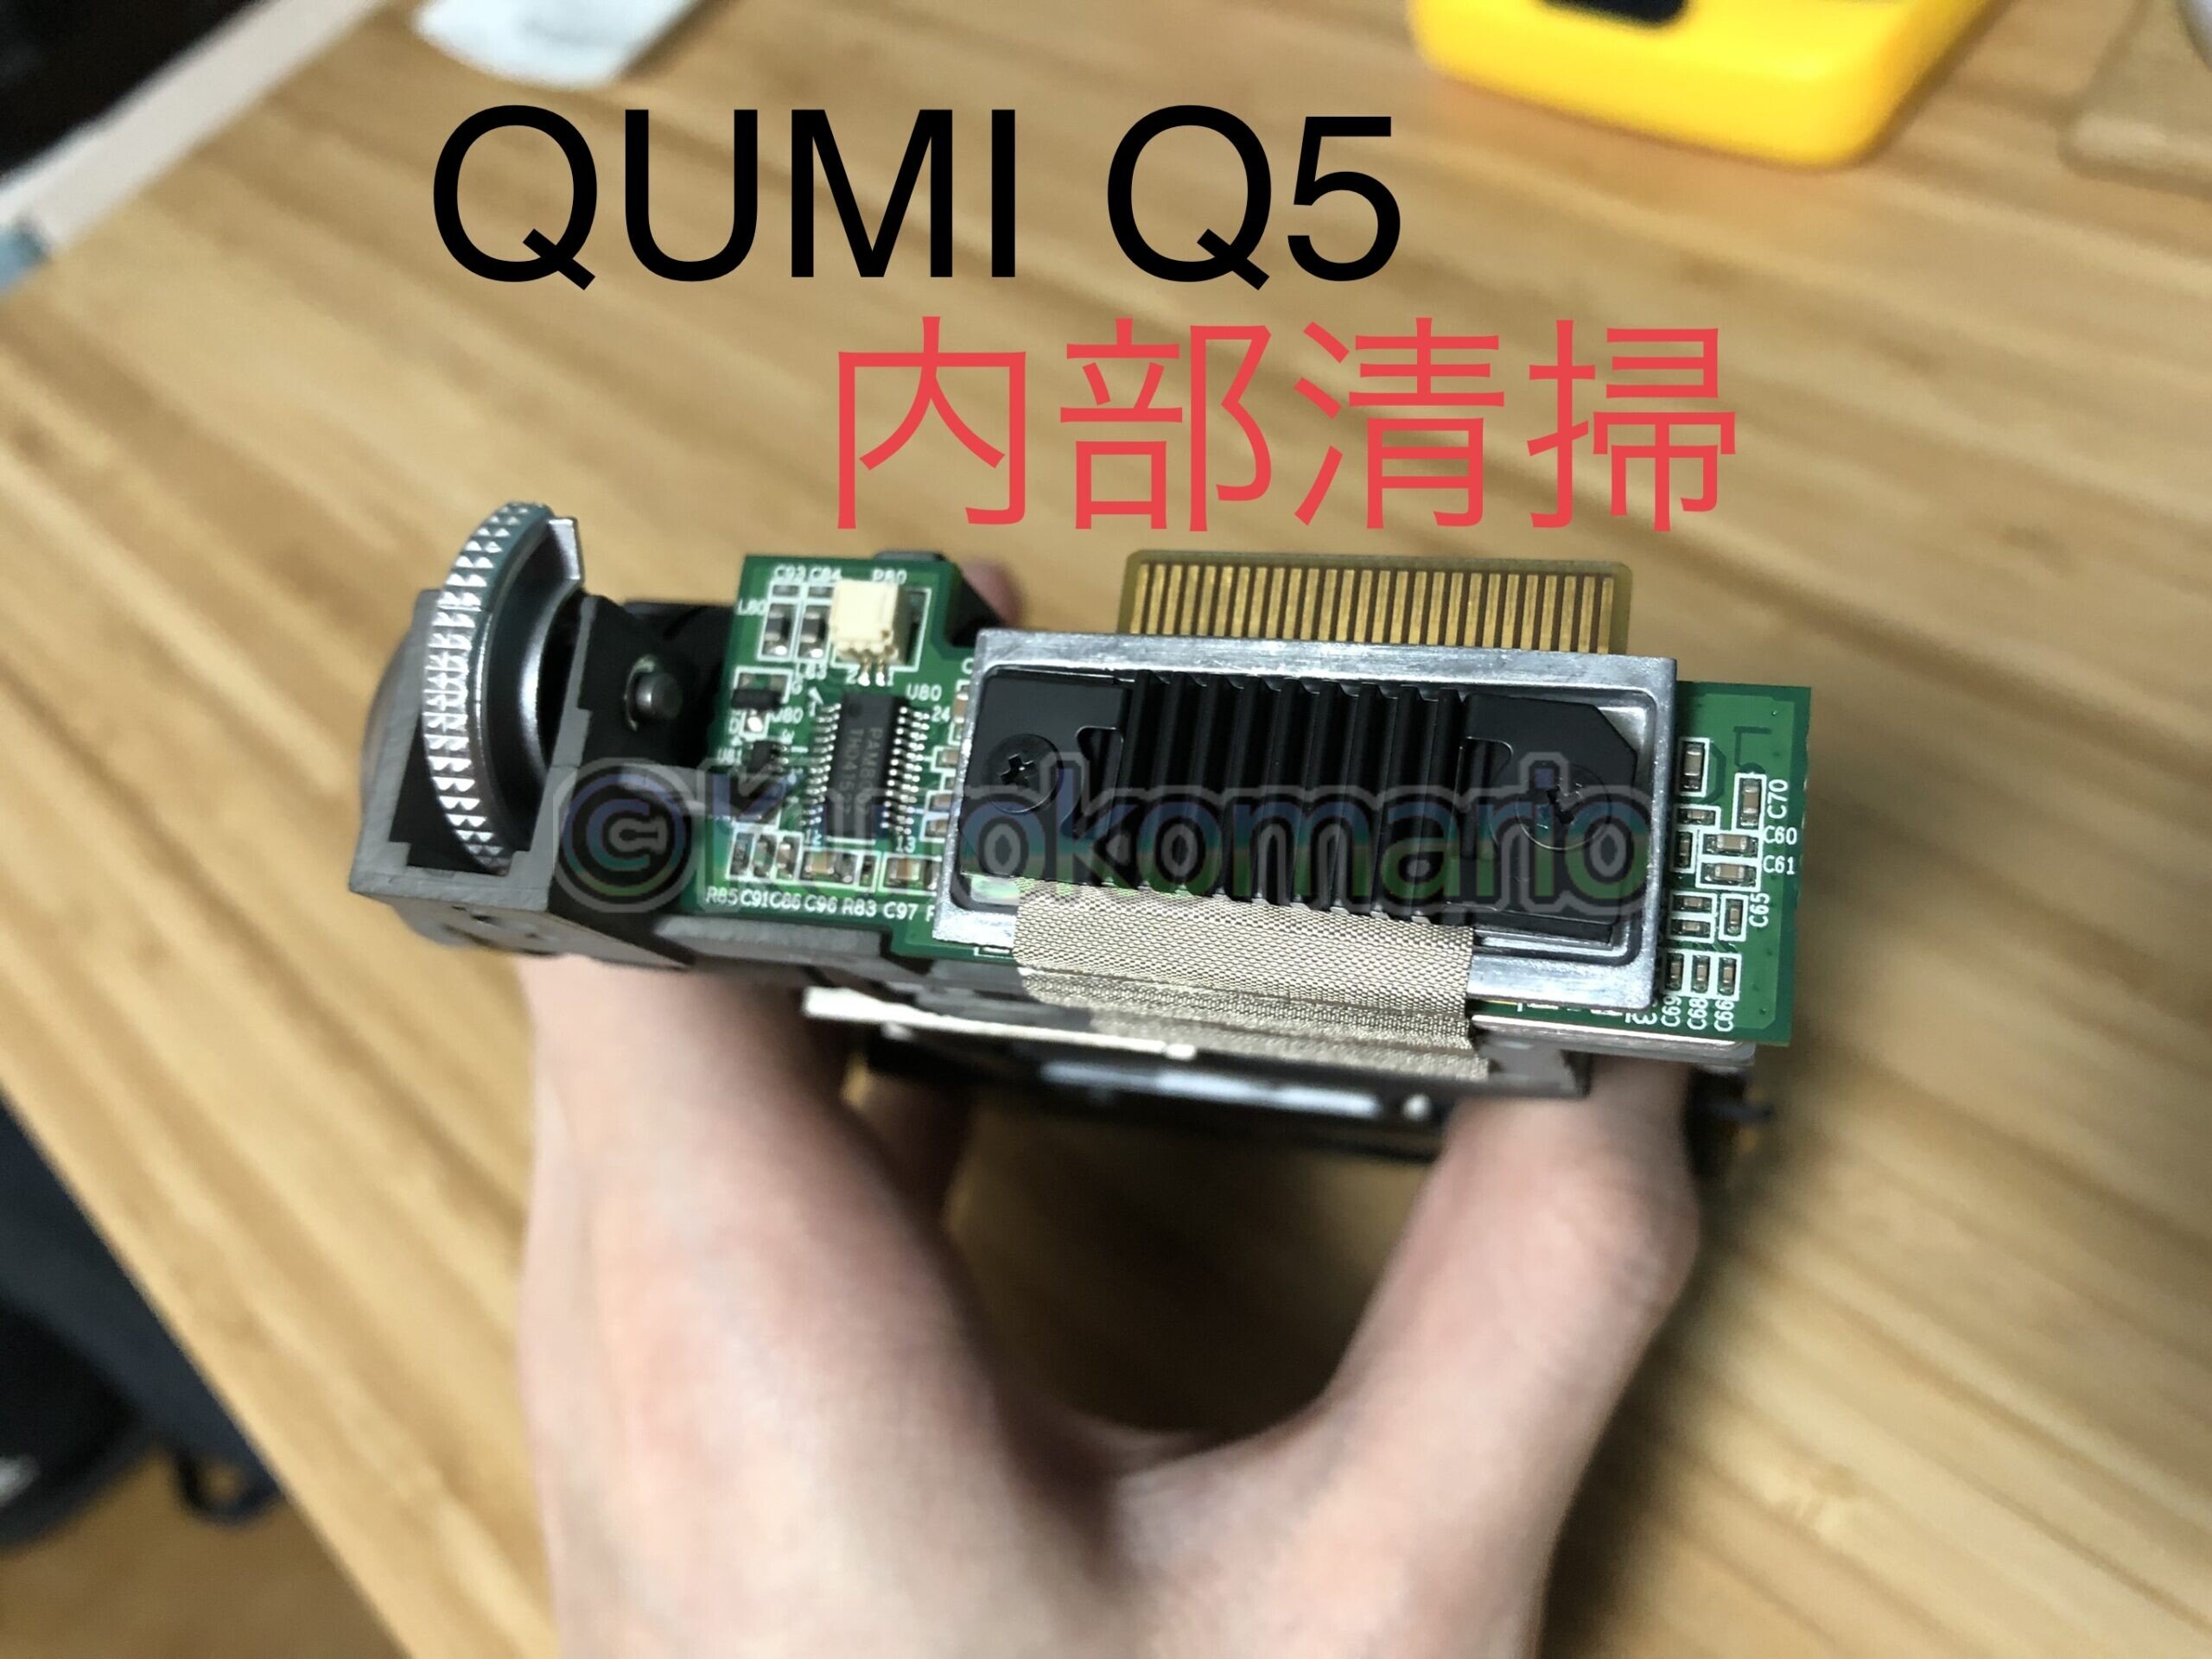 You are currently viewing 【分解】QUMI Q5を分解清掃